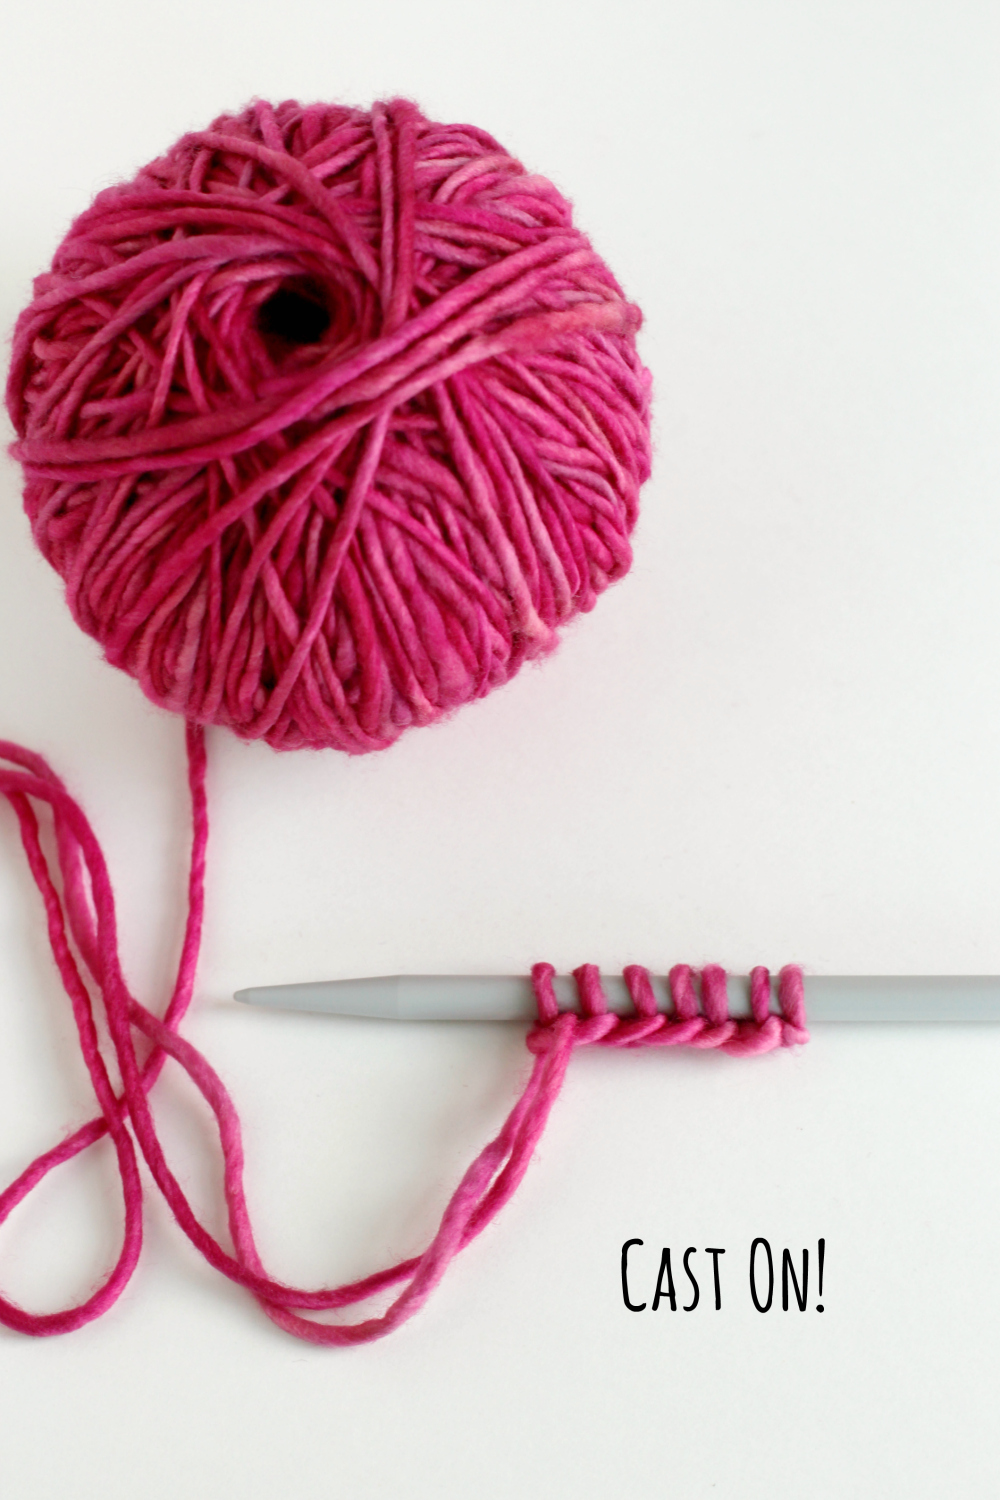 Casting-on-Knitting-Needles-with-Hand-Spun-Yarn